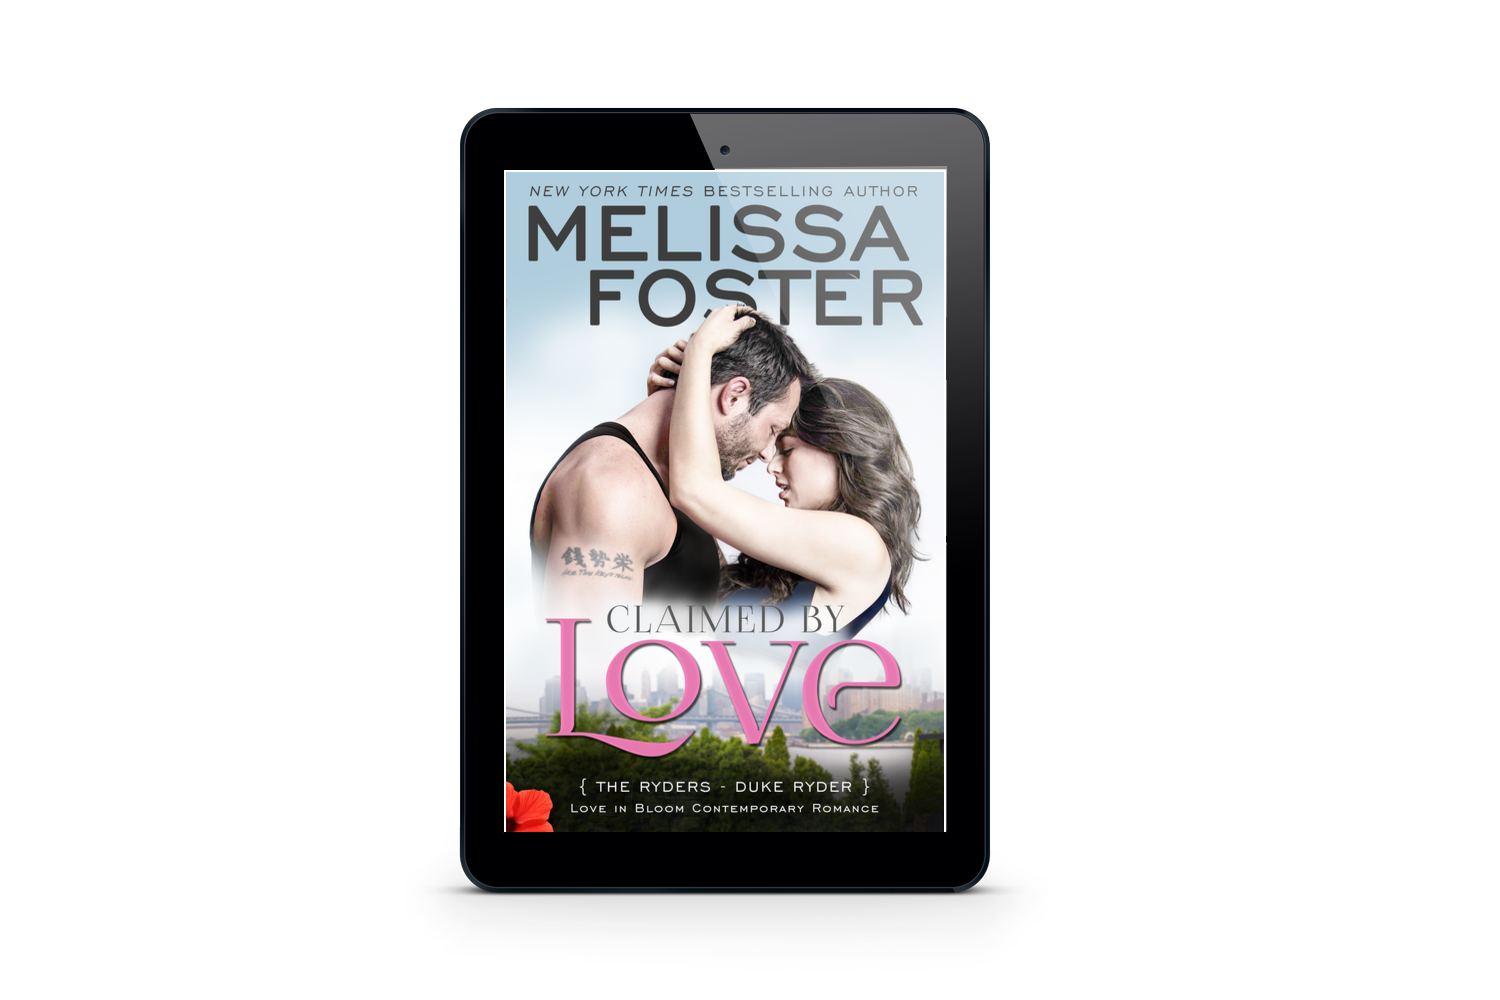 Claimed by Love Ebook